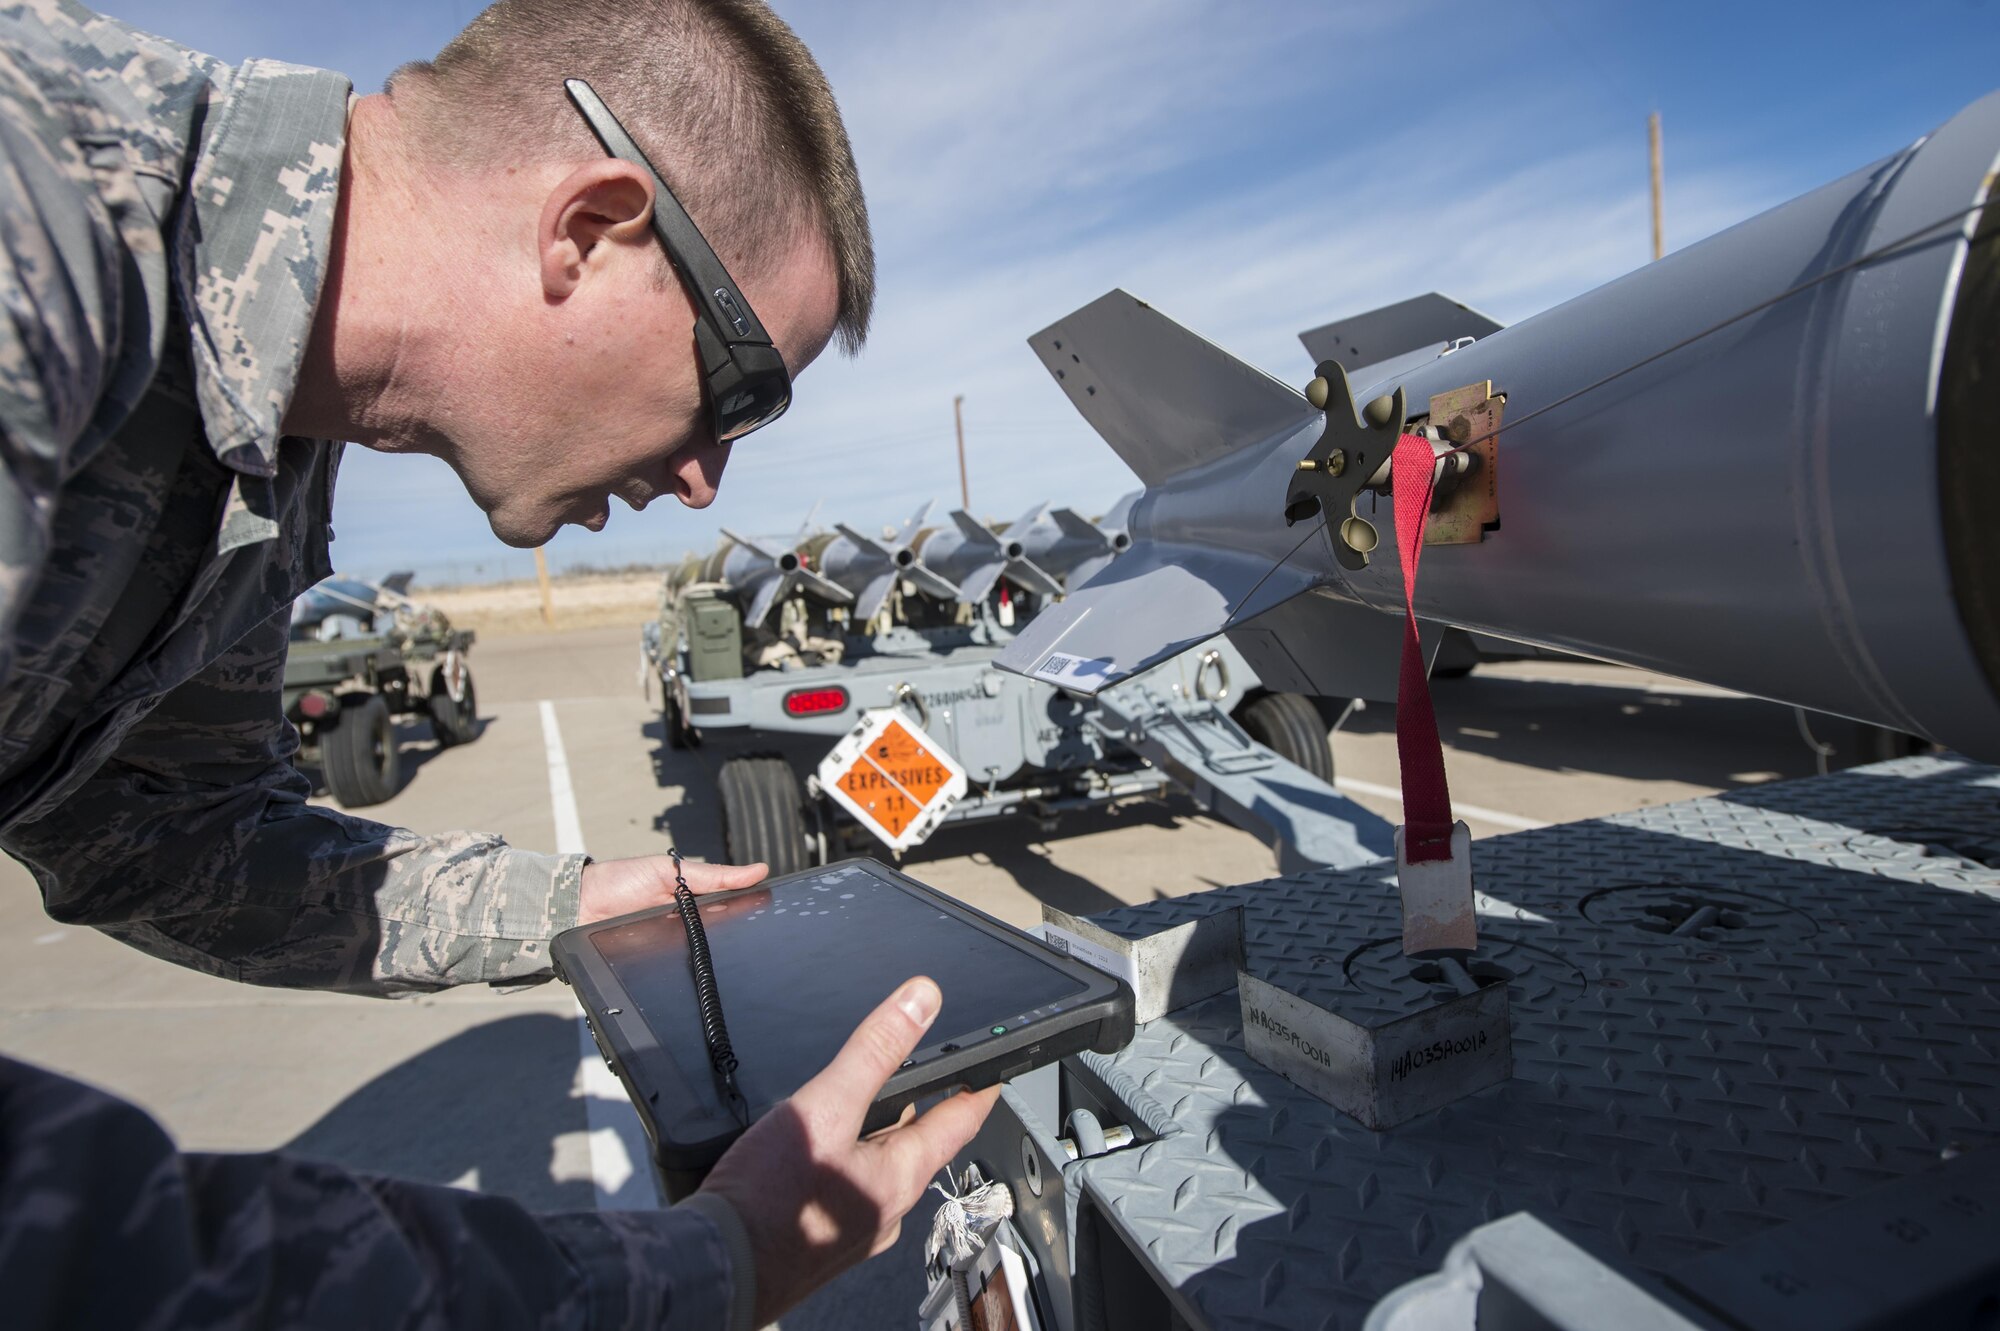 Staff Sgt. Joshua Tobin, a 49th Maintenance Squadron Munitions storage crew chief, uses a Getac tablet to scan a barcode on an asset, Jan. 9, 2017 at Holloman Air Force Base, N.M. The tablets are in the implementation phase, and are able to input information in real-time, significantly cutting down job times. (U.S. Air Force photo by Senior Airman Emily Kenney)